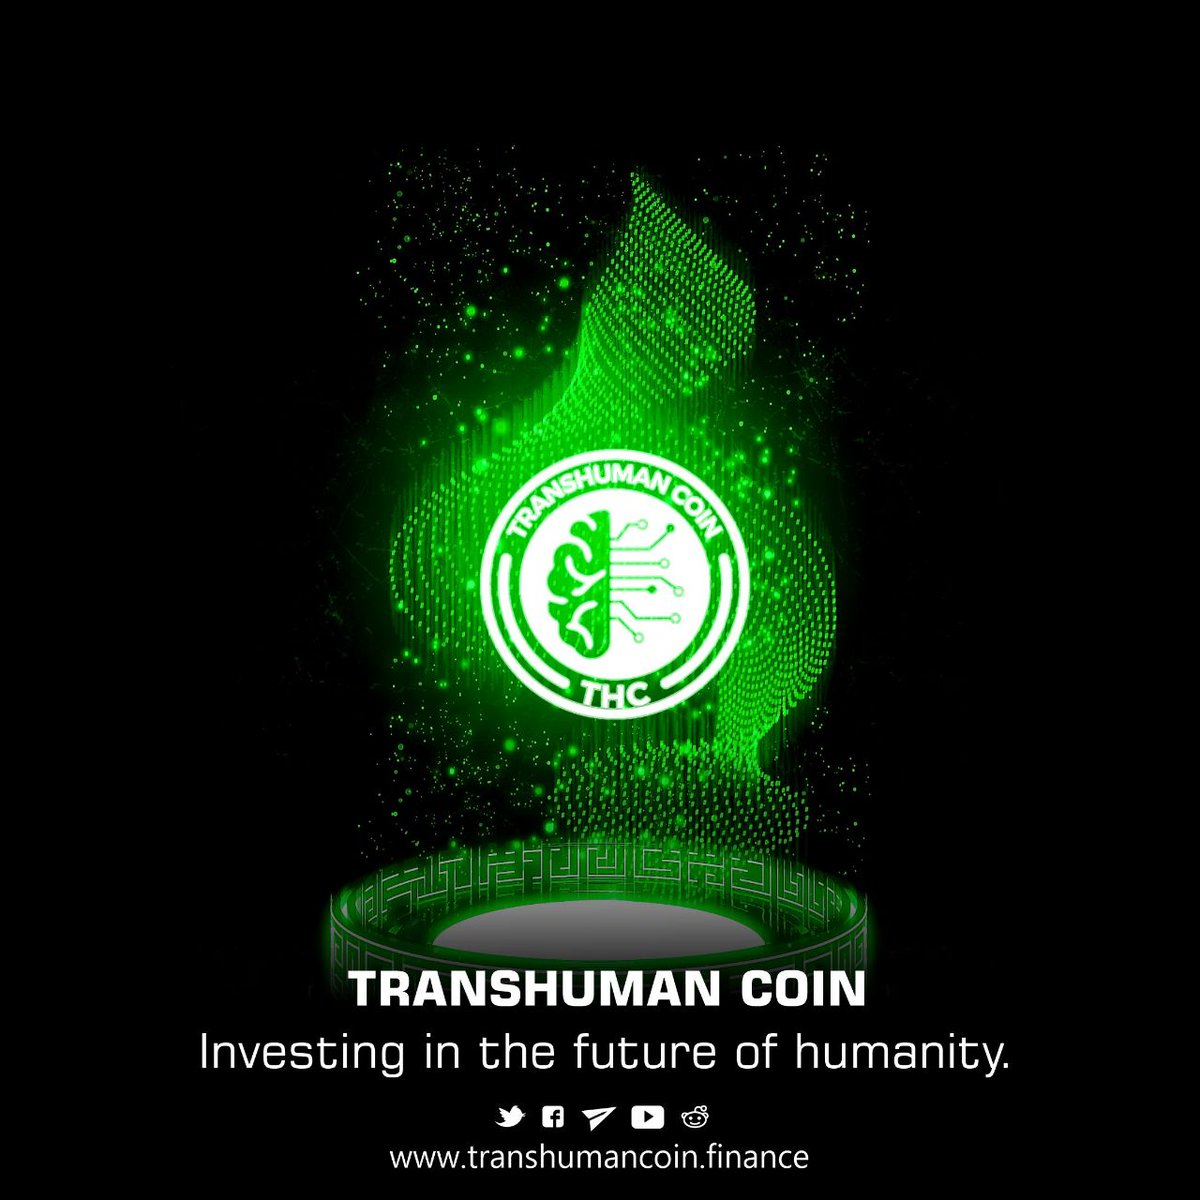 Transhuman coin is a powerful and amazing project. The team's hard work and dedication is unmatched.@transhumancoin @GTranshumanists @transhumanismAU @trashumanism